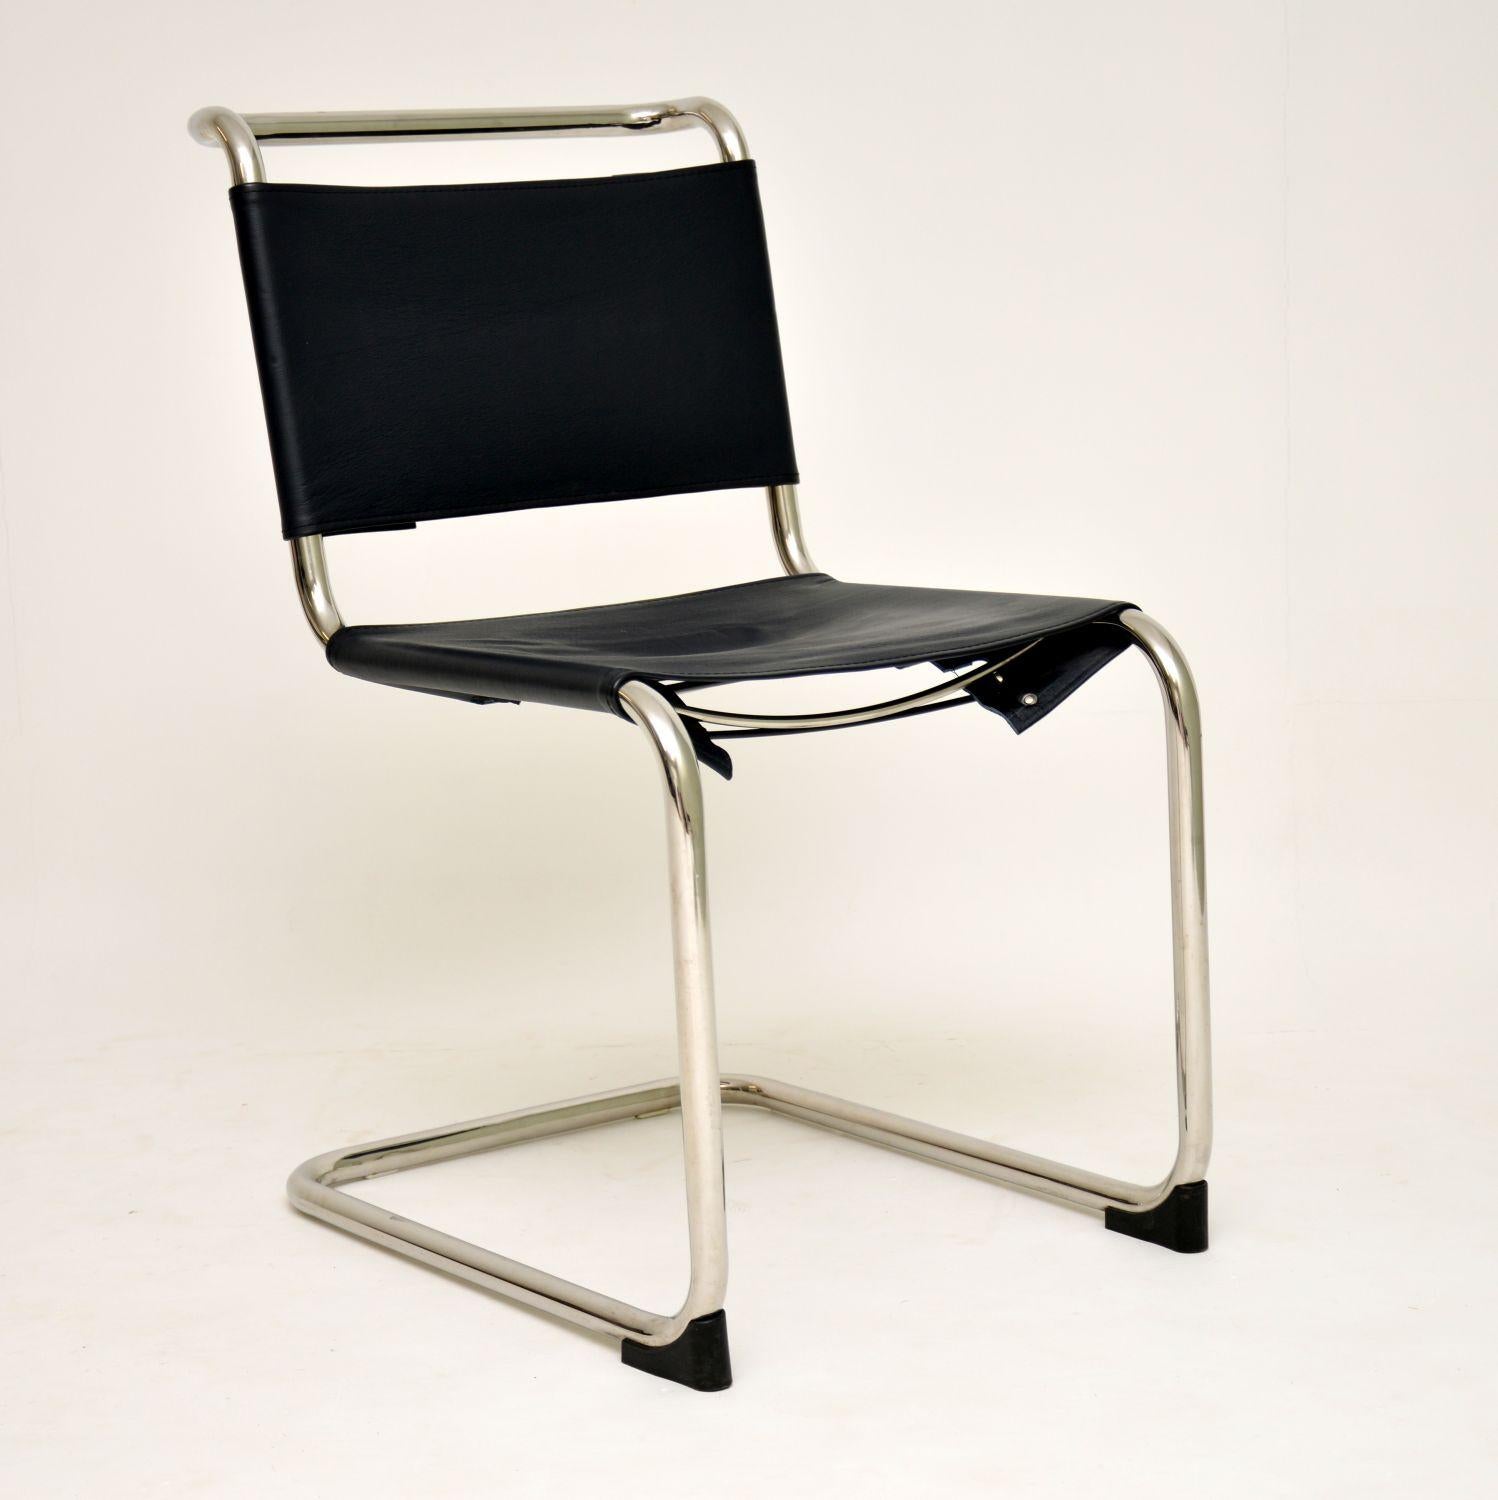 A beautiful and iconic chair design, this is the model S33 by Mart Stam, originally designed in 1926. This chair is more modern and dates from the late 20th century, it’s in super condition with only some extremely minor wear to be seen. The blue